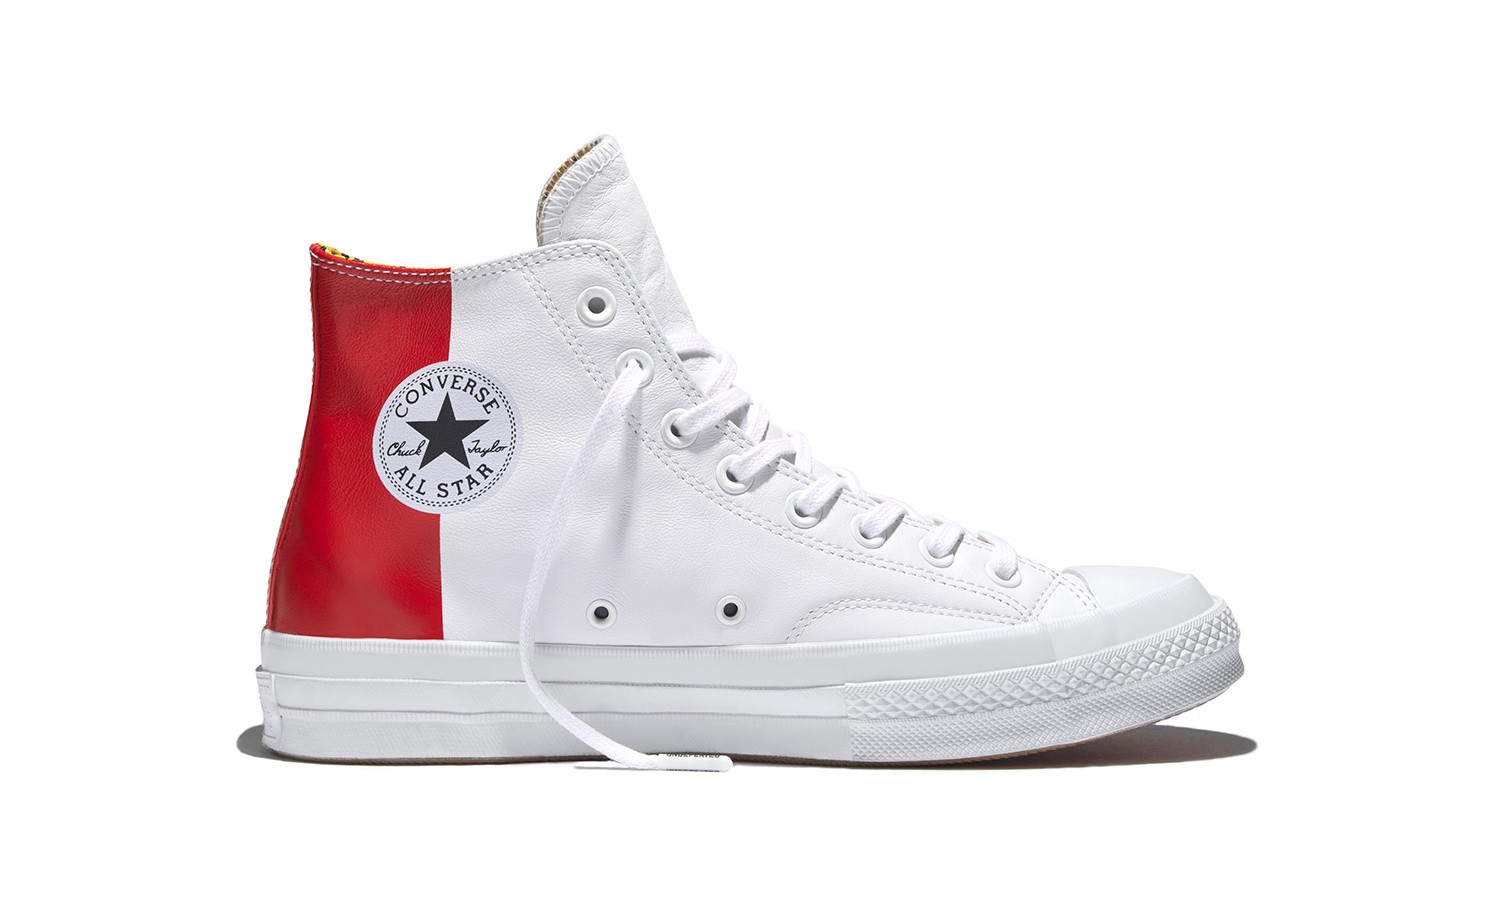 UNDEFEATED x Converse 秋冬联名 Chuck Taylor All Star ’70 释出